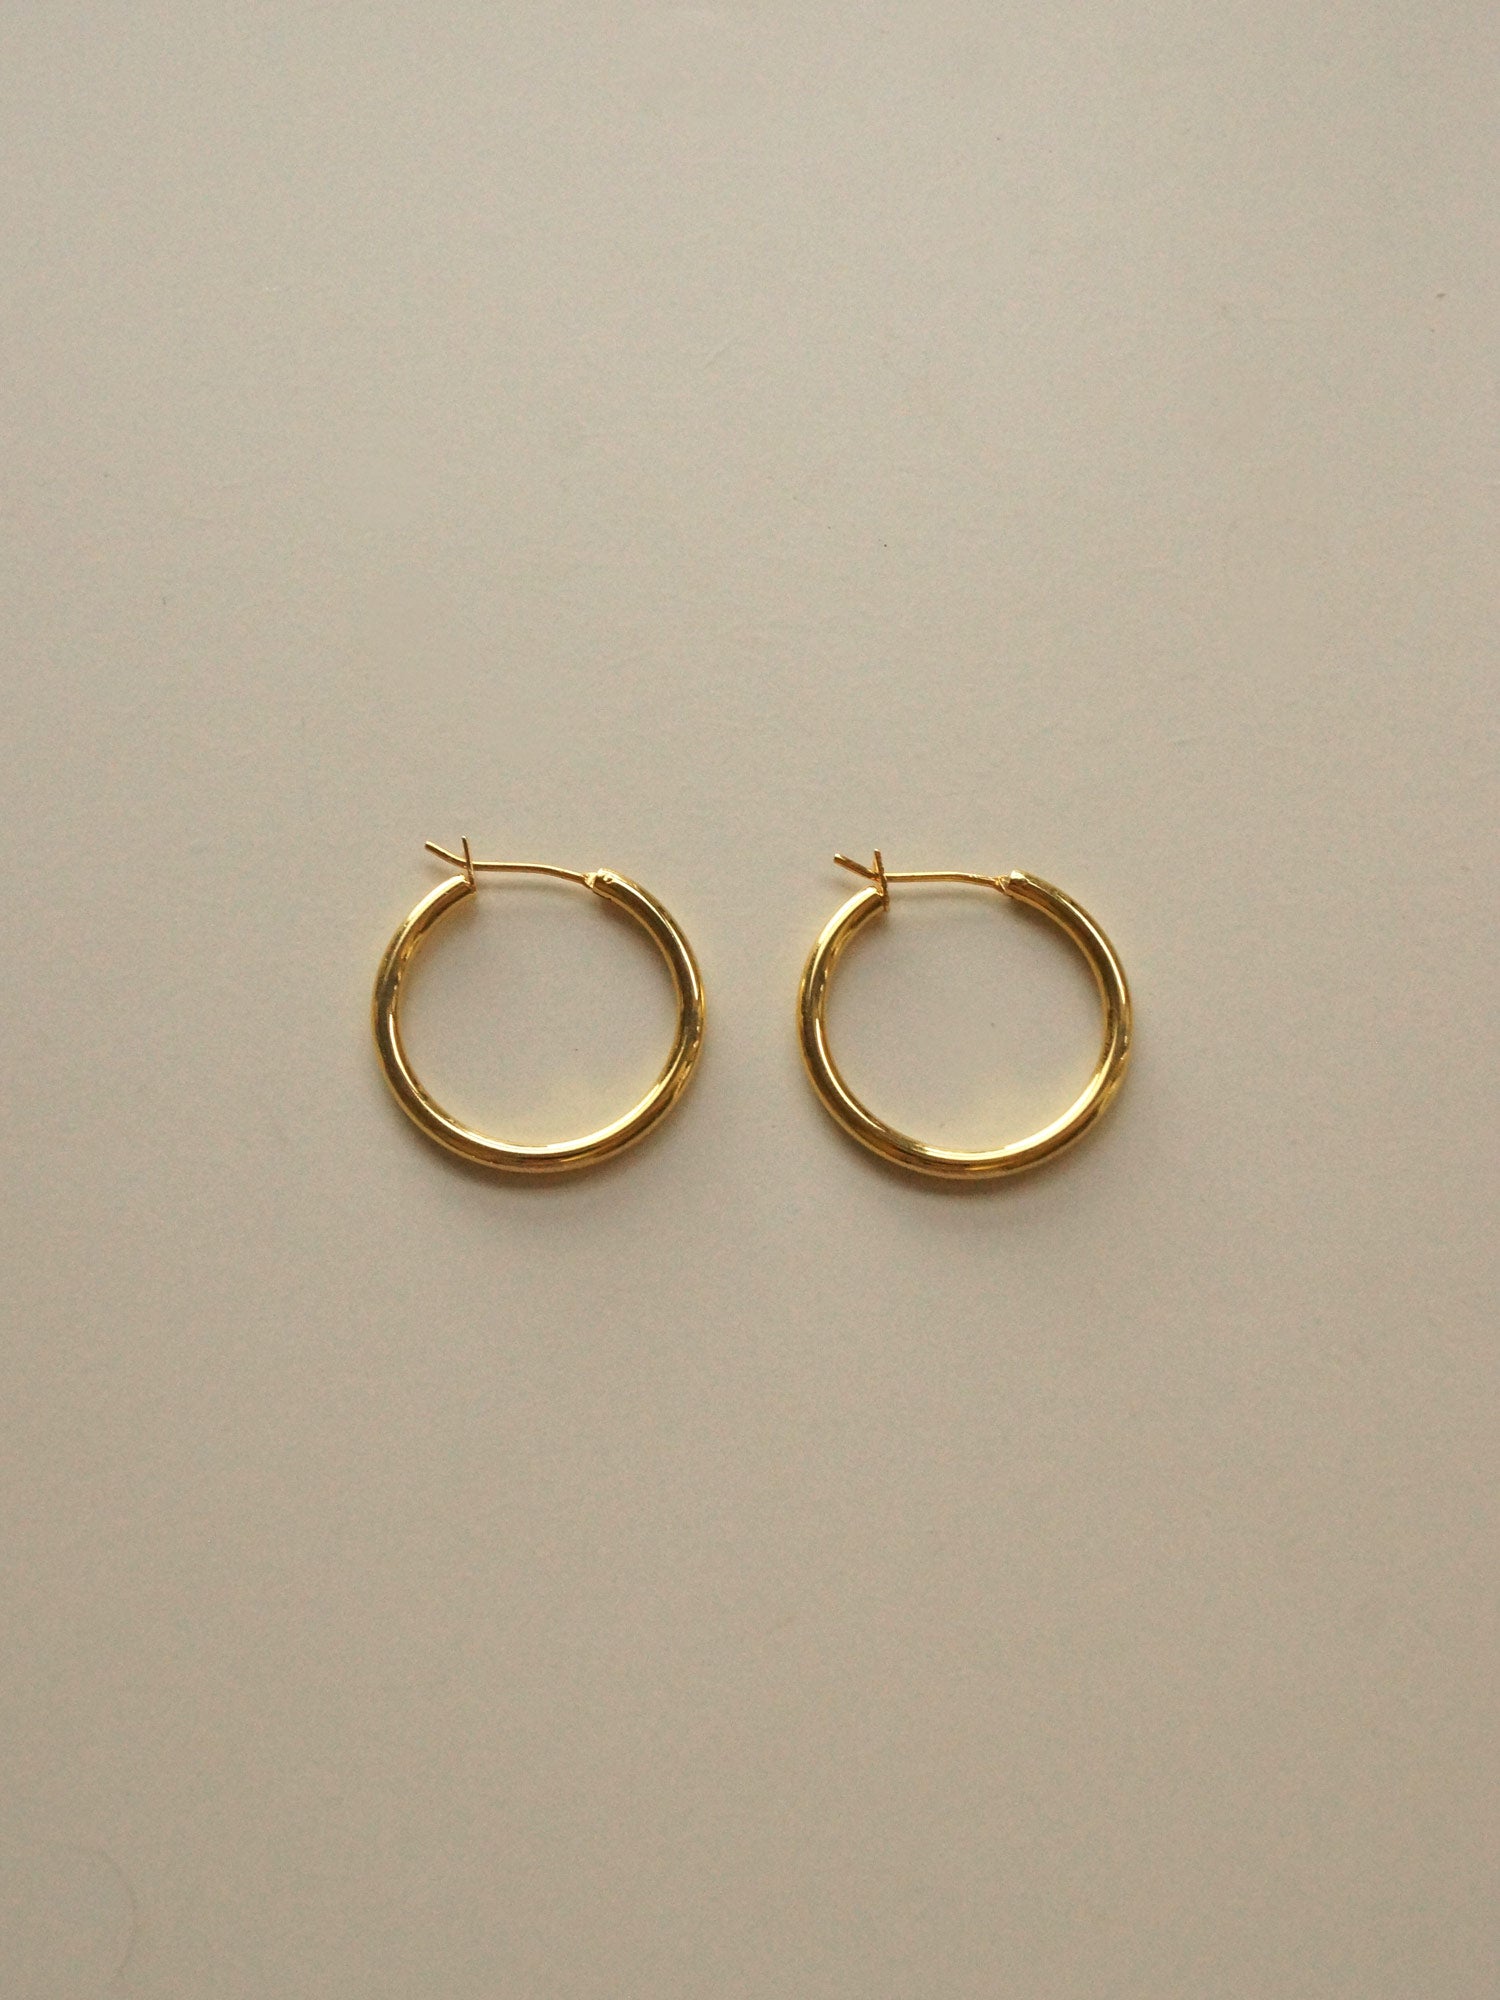 Essential Thin Hoops - Small *18K Gold-plated S925